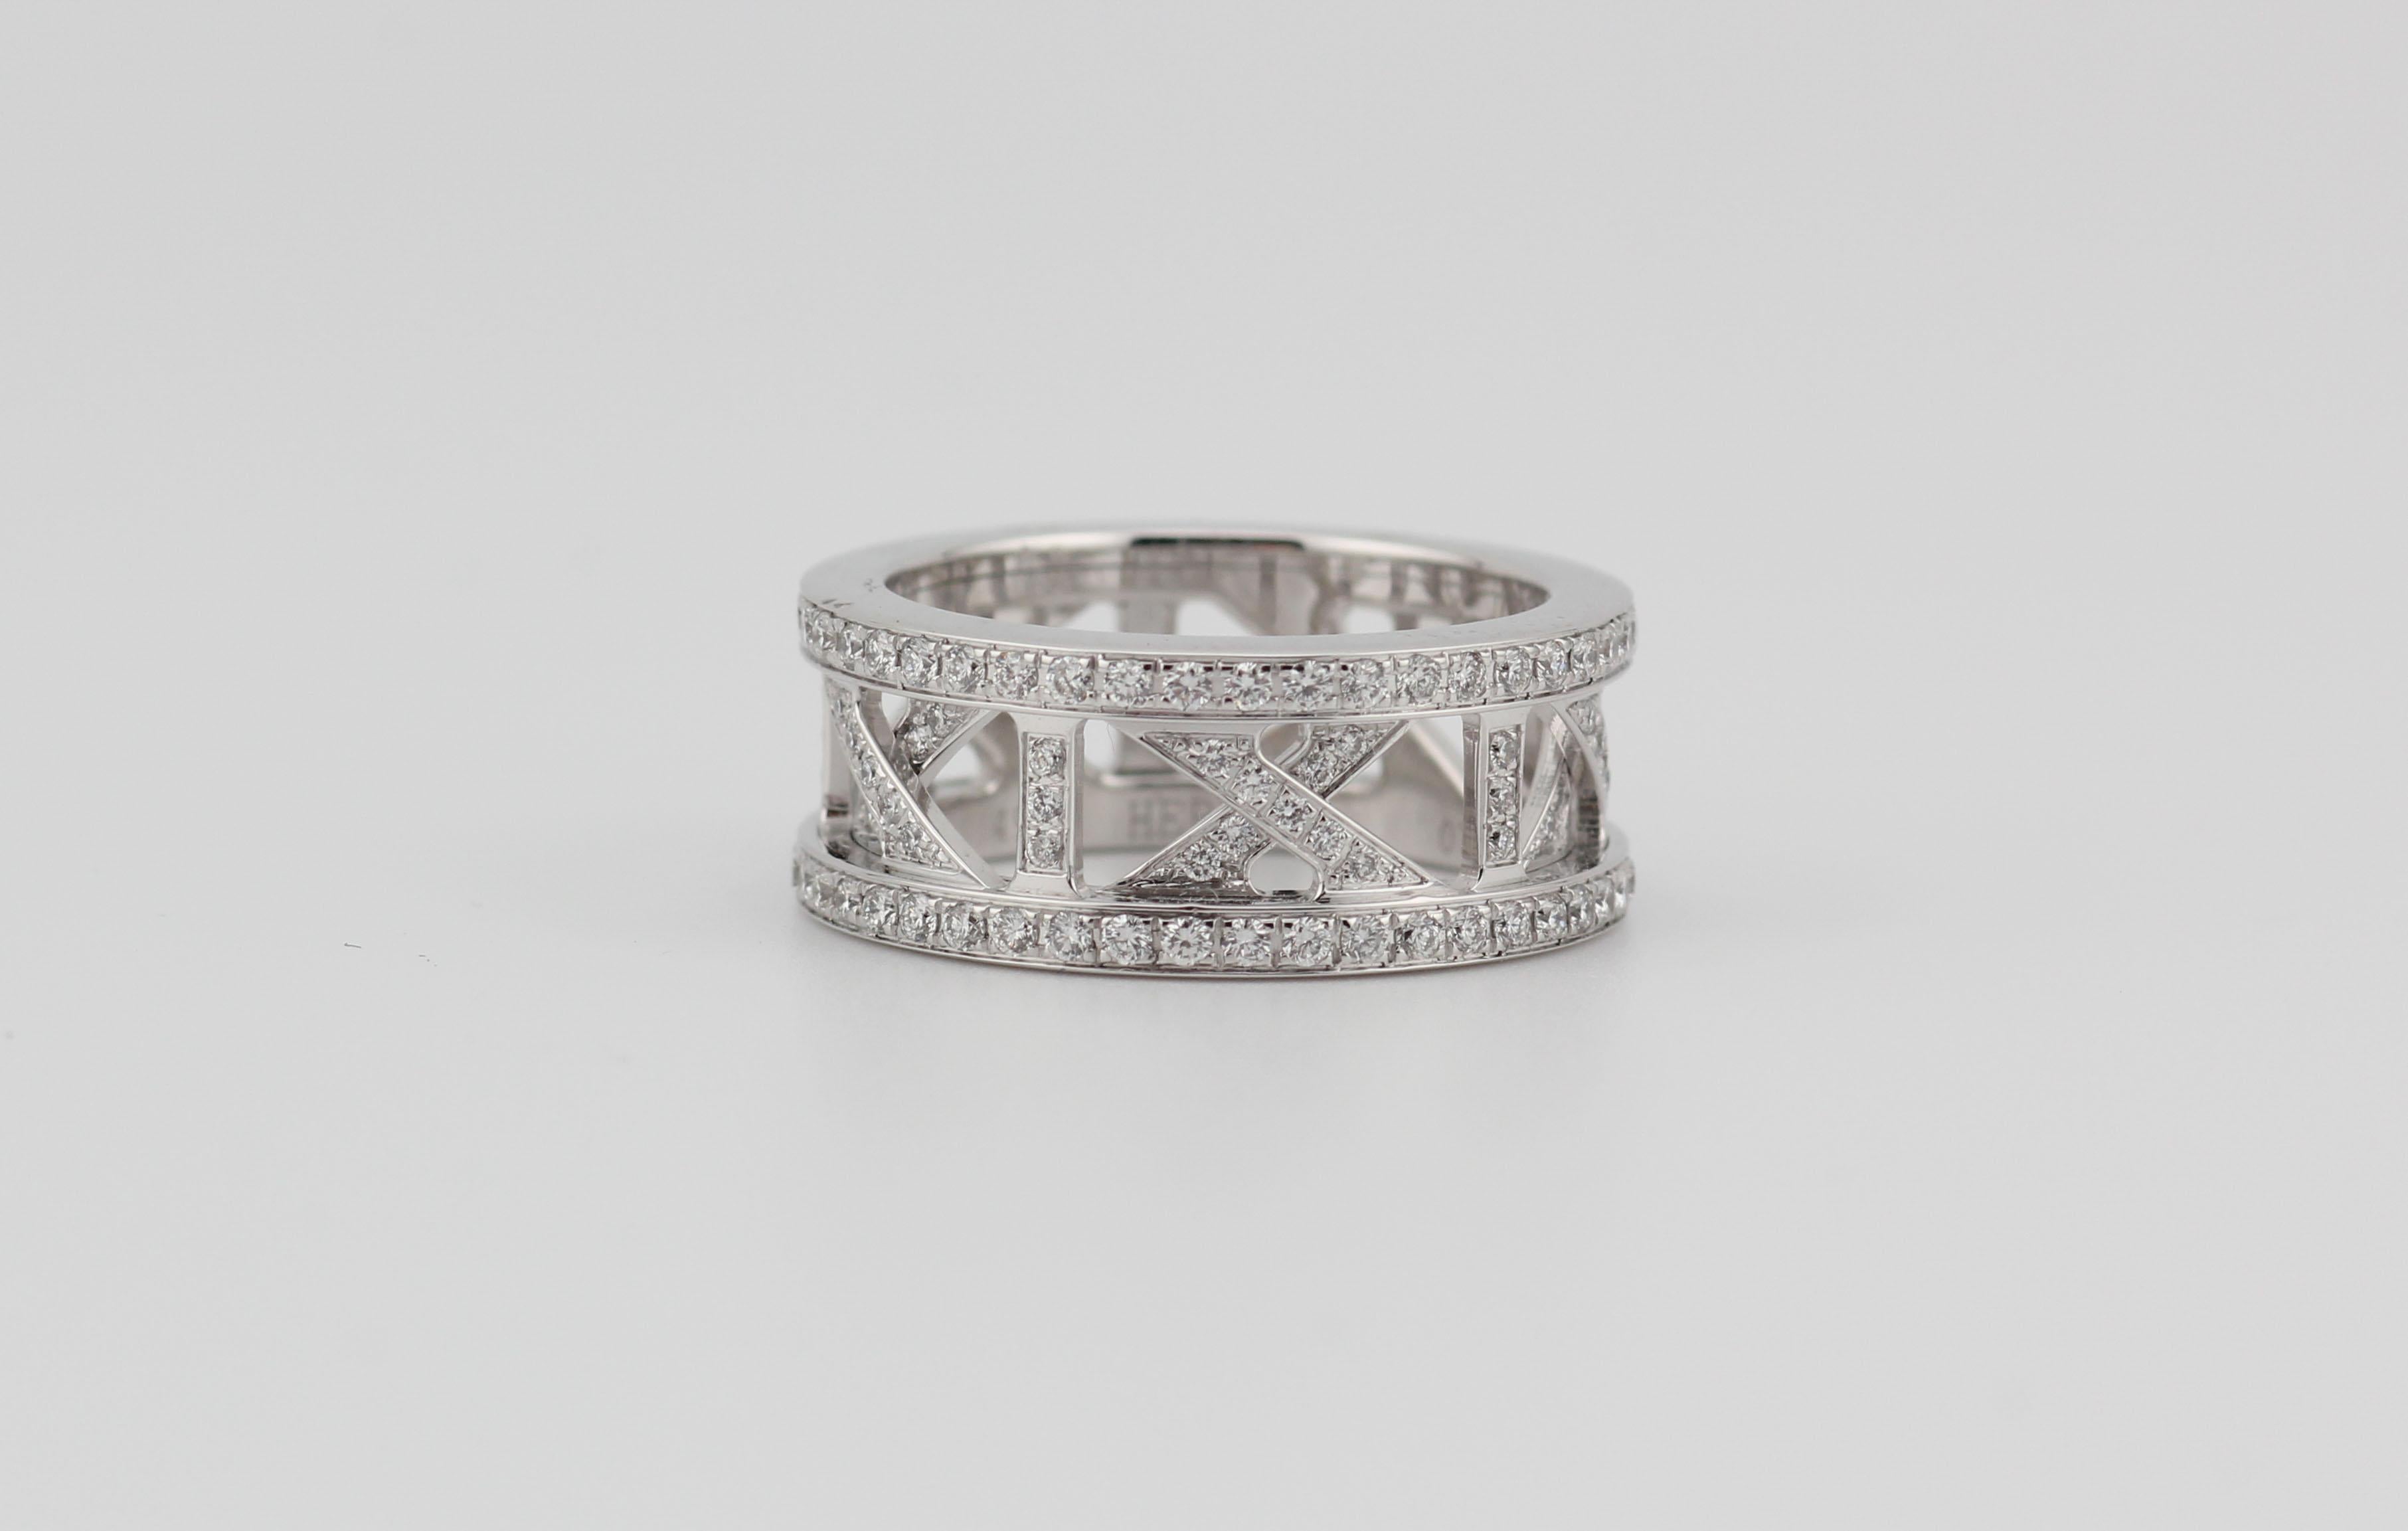 Fine diamond and 18k white gold band with a repeating Roman numeral XI pattern,  by Hermes. Size 49, US size 4.75-5.

This Hermes band is a high-end and exquisite piece of jewelry crafted by the renowned luxury brand Hermes. Known for their